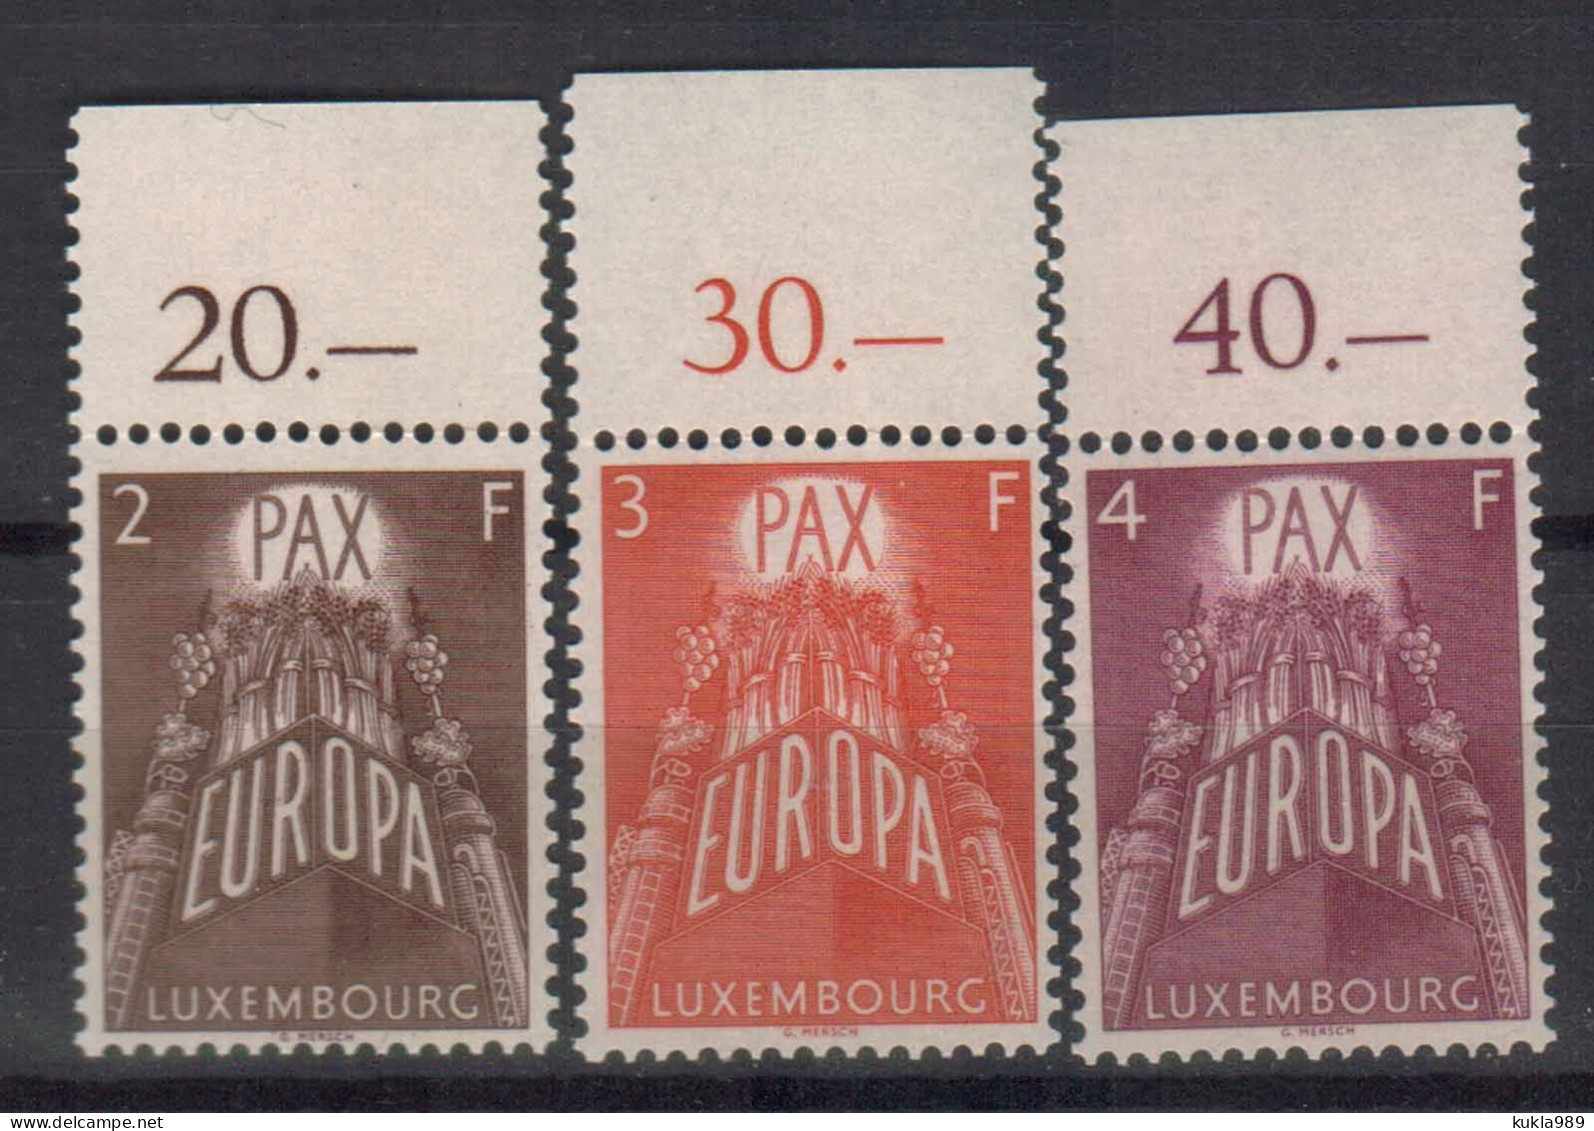 LUXEMBOURG STAMPS. 1957 Sc.#329-331,  MNH - Unused Stamps